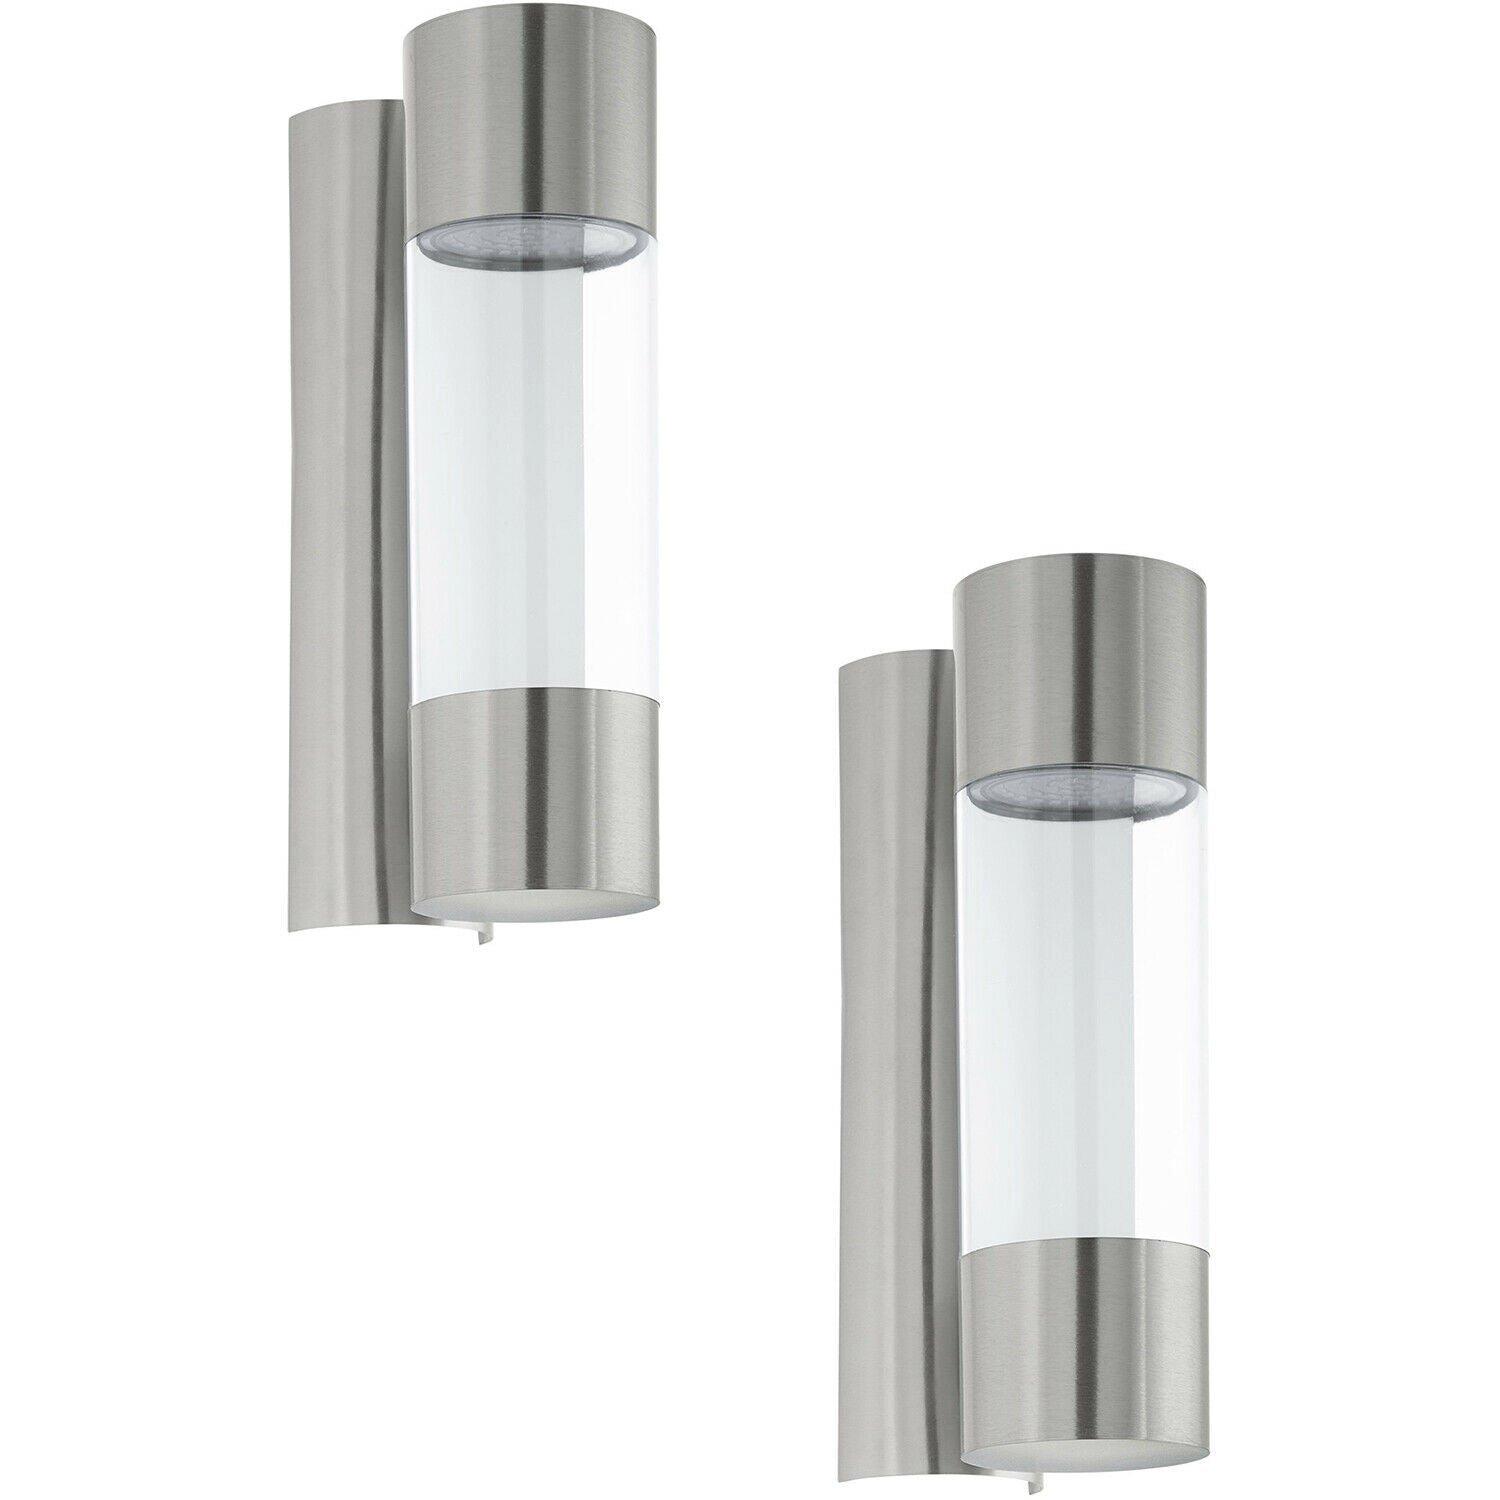 2 PACK IP44 Outdoor Wall Light Stainless Steel / Glass 3.7W LED Porch Lamp